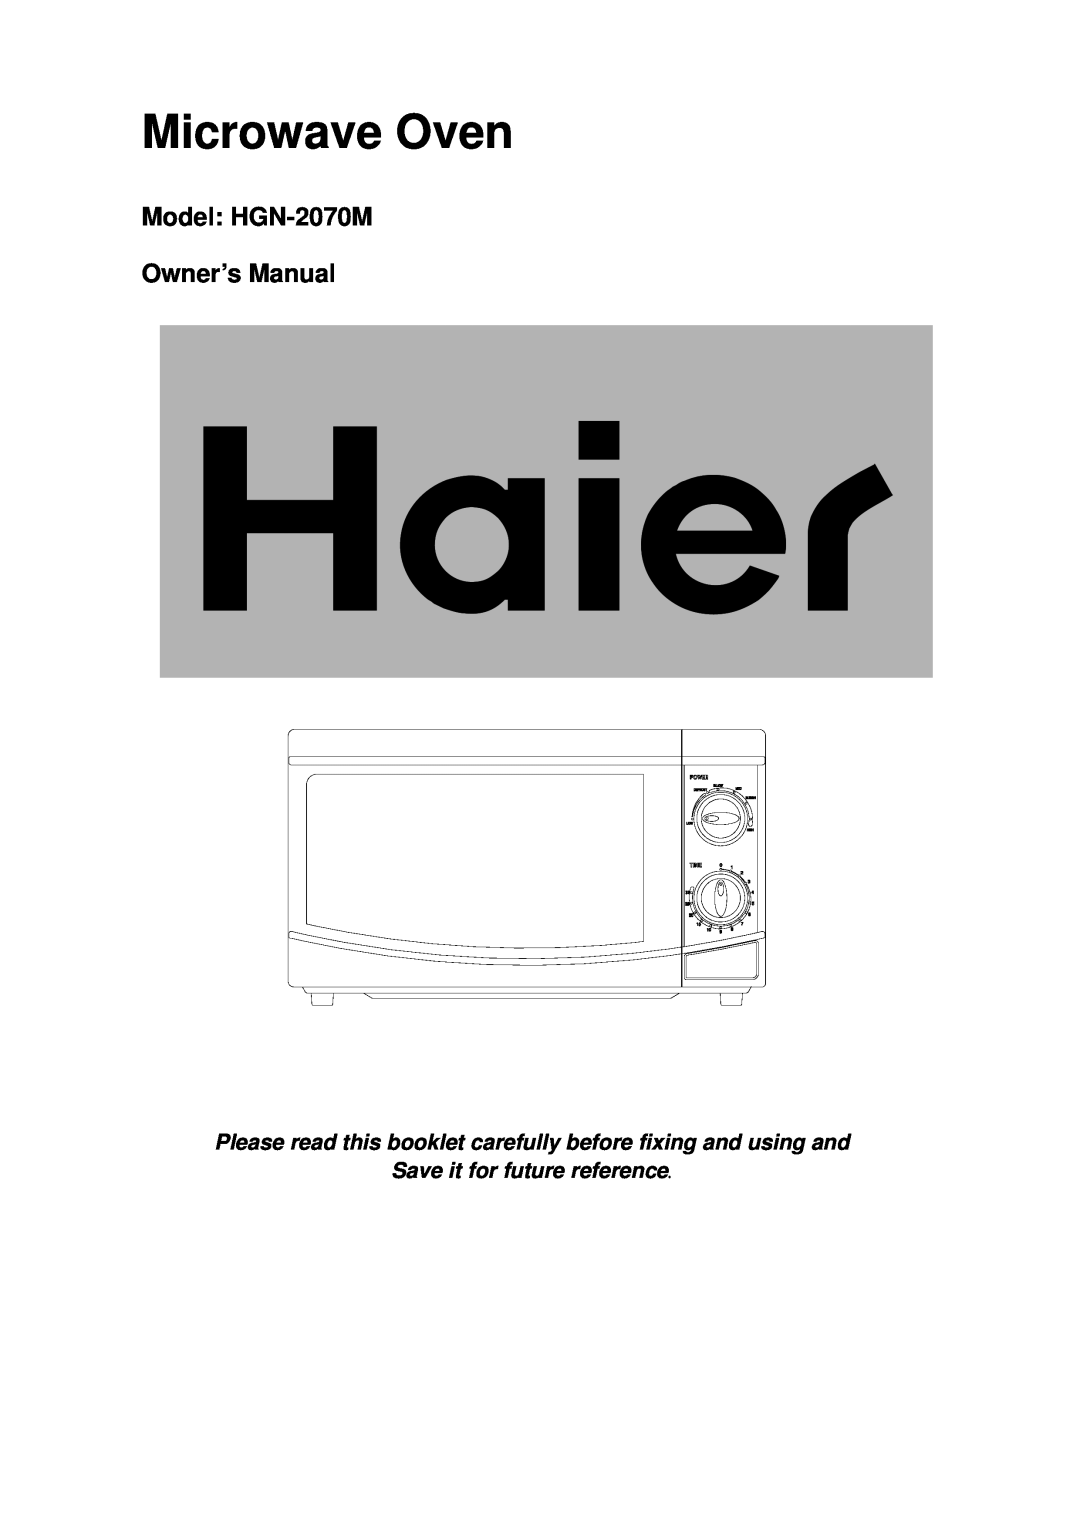 Haier HGN-2070M owner manual Microwave Oven, Save it for future reference 